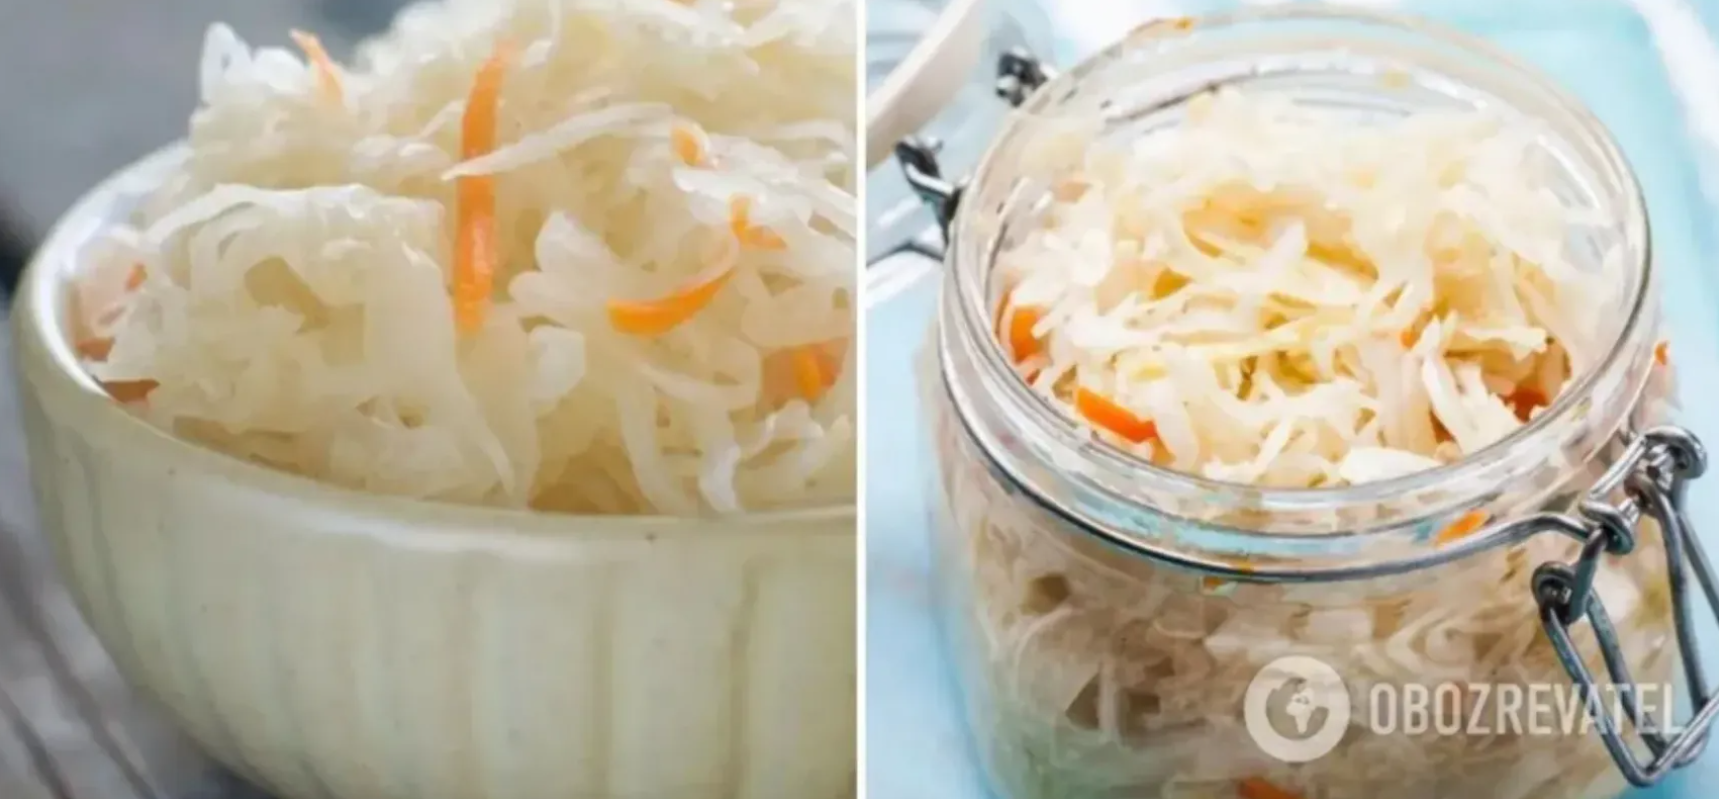 How many carrots to add to sauerkraut